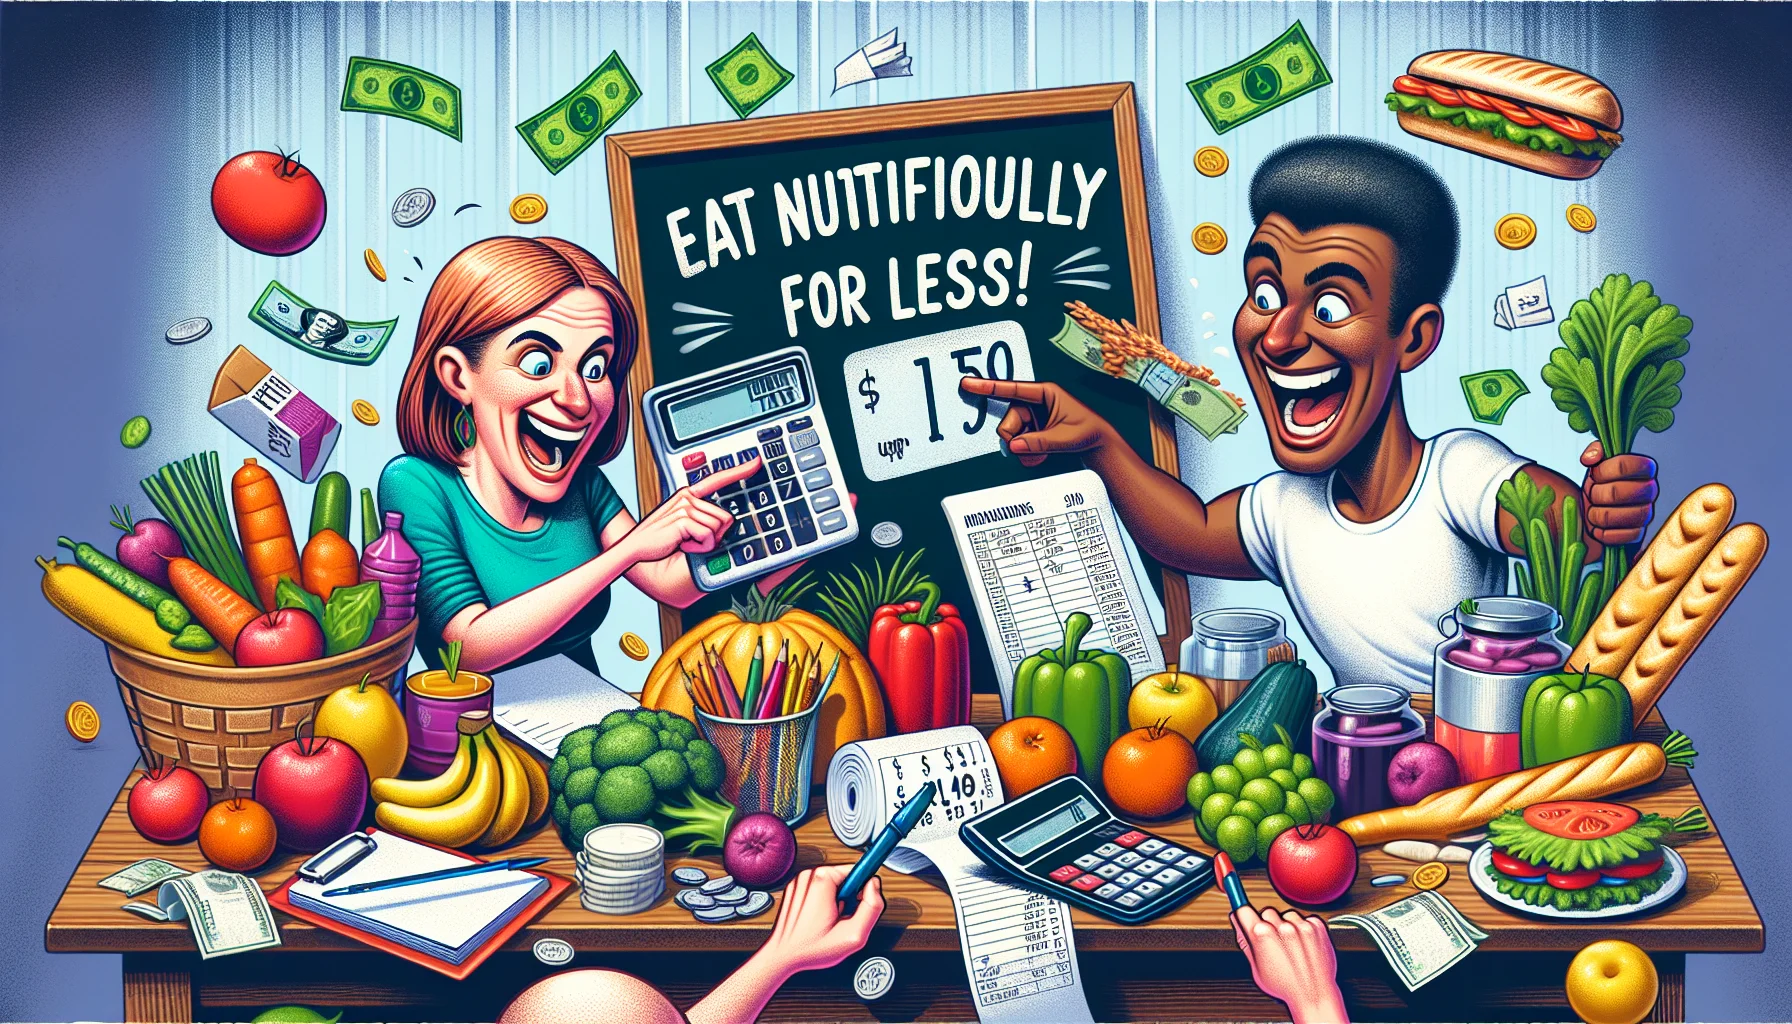 A humorous kitchen scene in which characters are meticulously calculating a grocery budget. Stationary, calculators, and money are strewn about the table. A mix of food items, both healthy options like fruits, vegetables, lean meats, and whole grains, as well as processed junk food are displayed. The characters, a Caucasian woman and a Middle-Eastern man, are laughing and playfully arguing pointing towards the healthy options with a big caption saying 'Eat nutritiously for less!'. Another character, a Black boy, is popping out from behind with a wide grin, holding up a large calculator showing impressive savings.